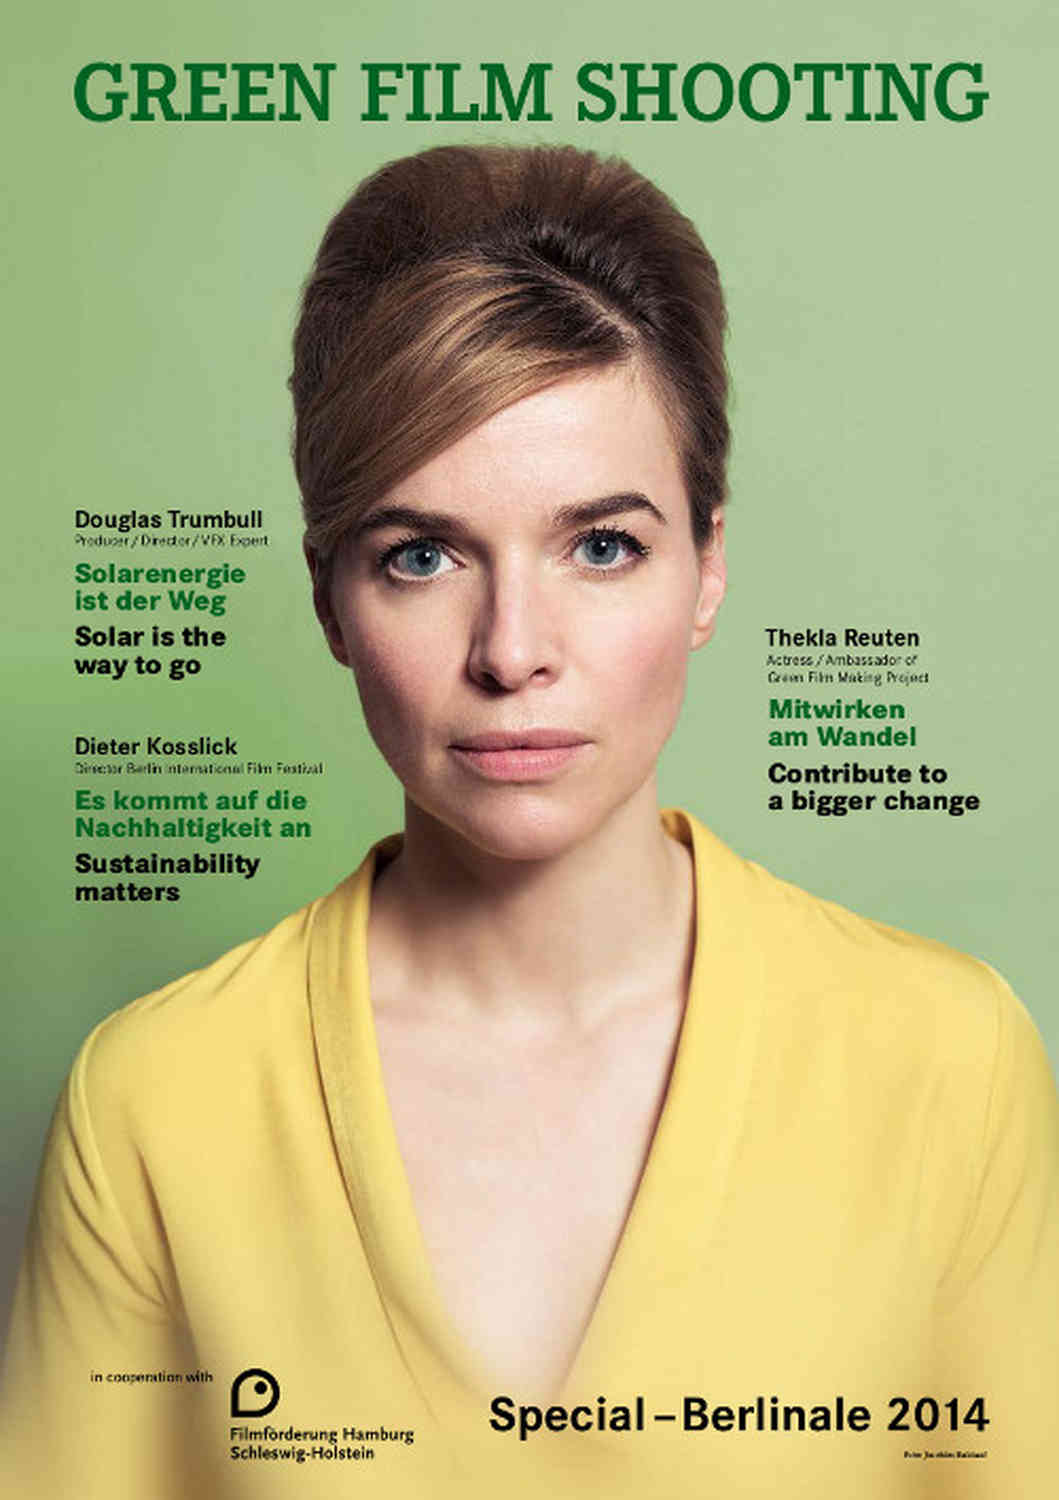 Thekla on the cover of 'Green Film Shooting' Magazine's special Berlinale edition